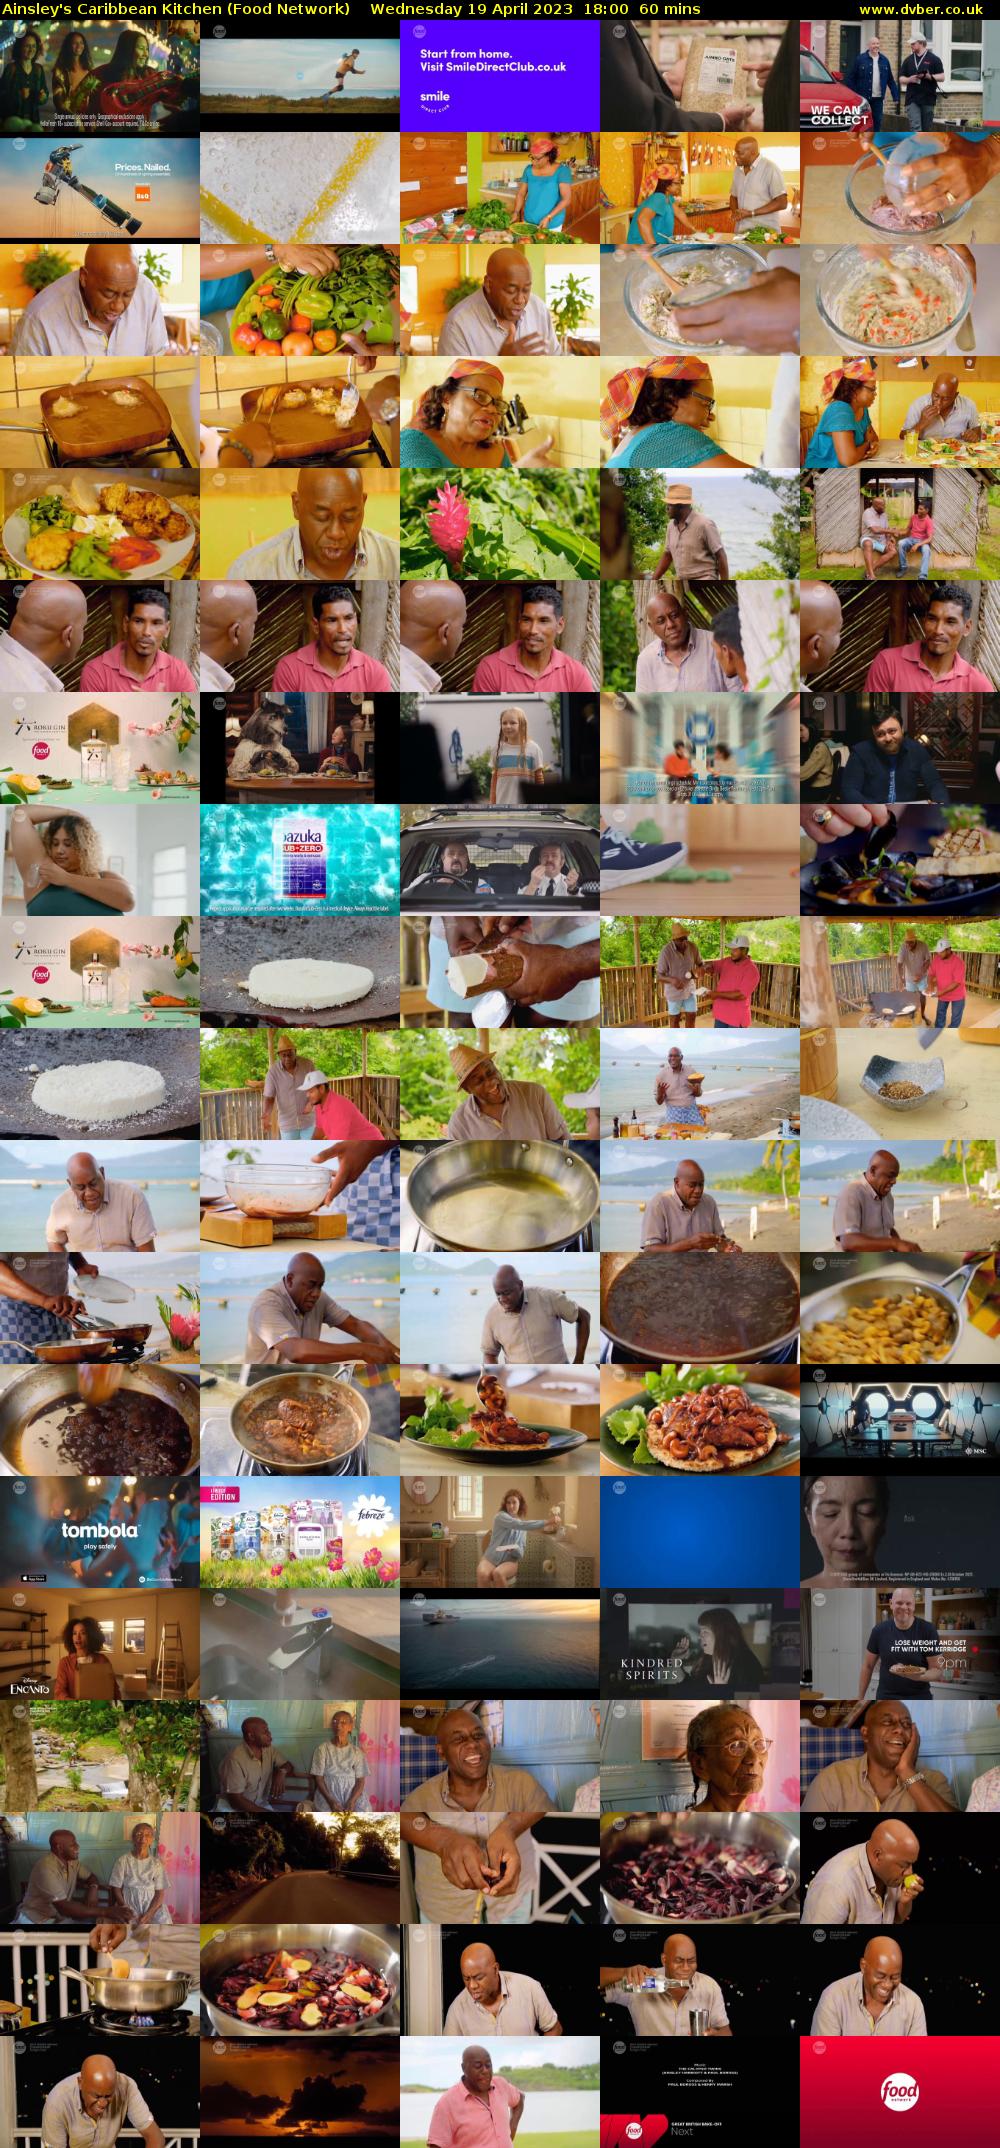 Ainsley's Caribbean Kitchen (Food Network) Wednesday 19 April 2023 18:00 - 19:00